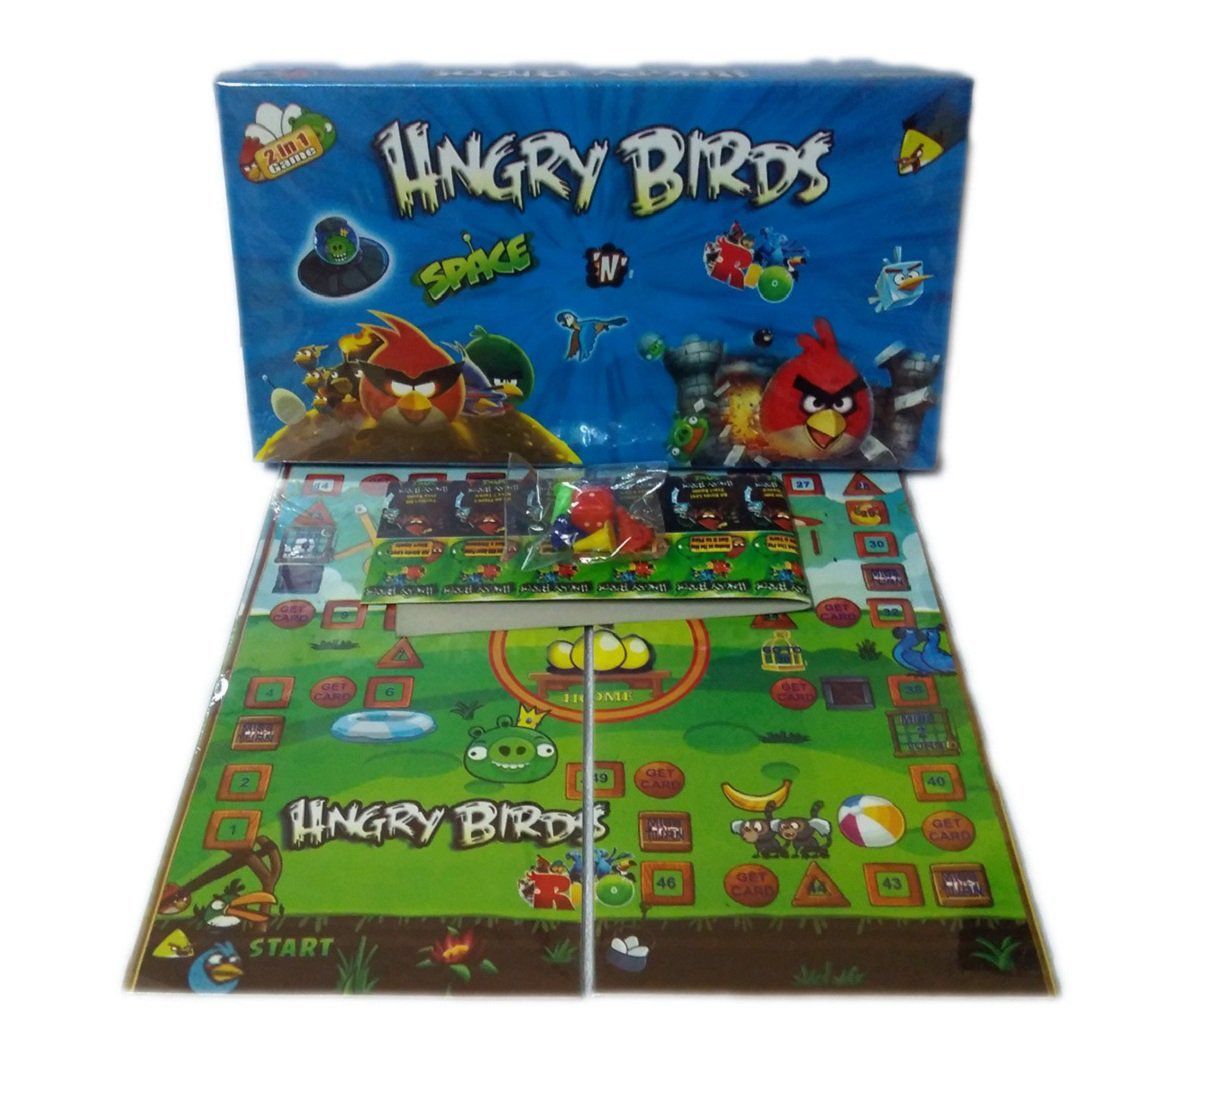 angry birds space game toys